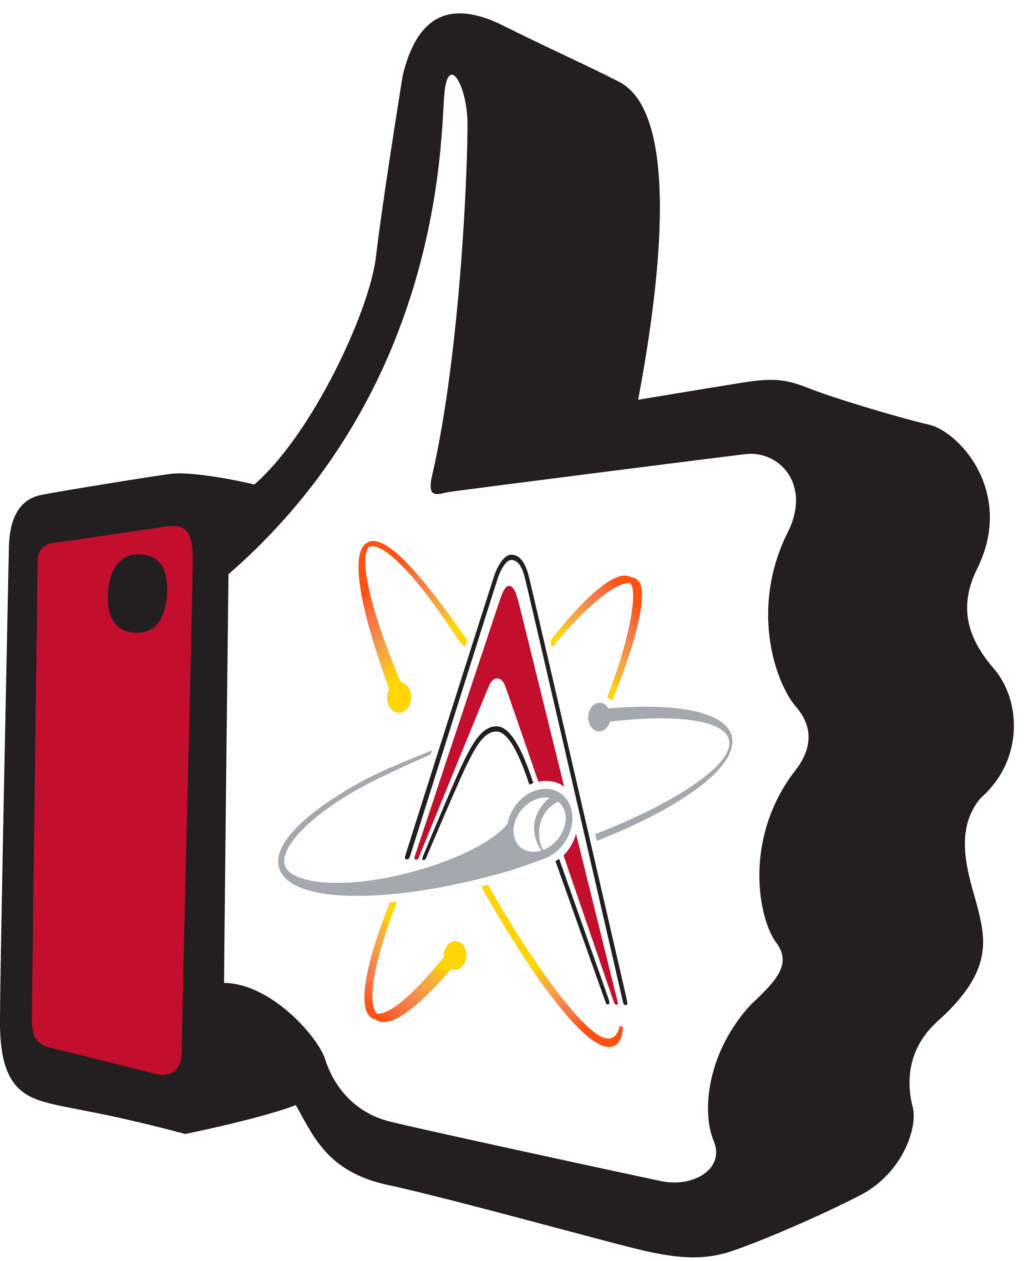 albuquerque isotopes 10 12 Styles PCL (Pacific Coast League) Albuquerque Isotopes Svg, Albuquerque Isotopes Svg, Albuquerque Isotopes Vector Logo, Albuquerque Isotopes baseball Clipart, Albuquerque Isotopes png, Albuquerque Isotopes cricut files, baseball svg.